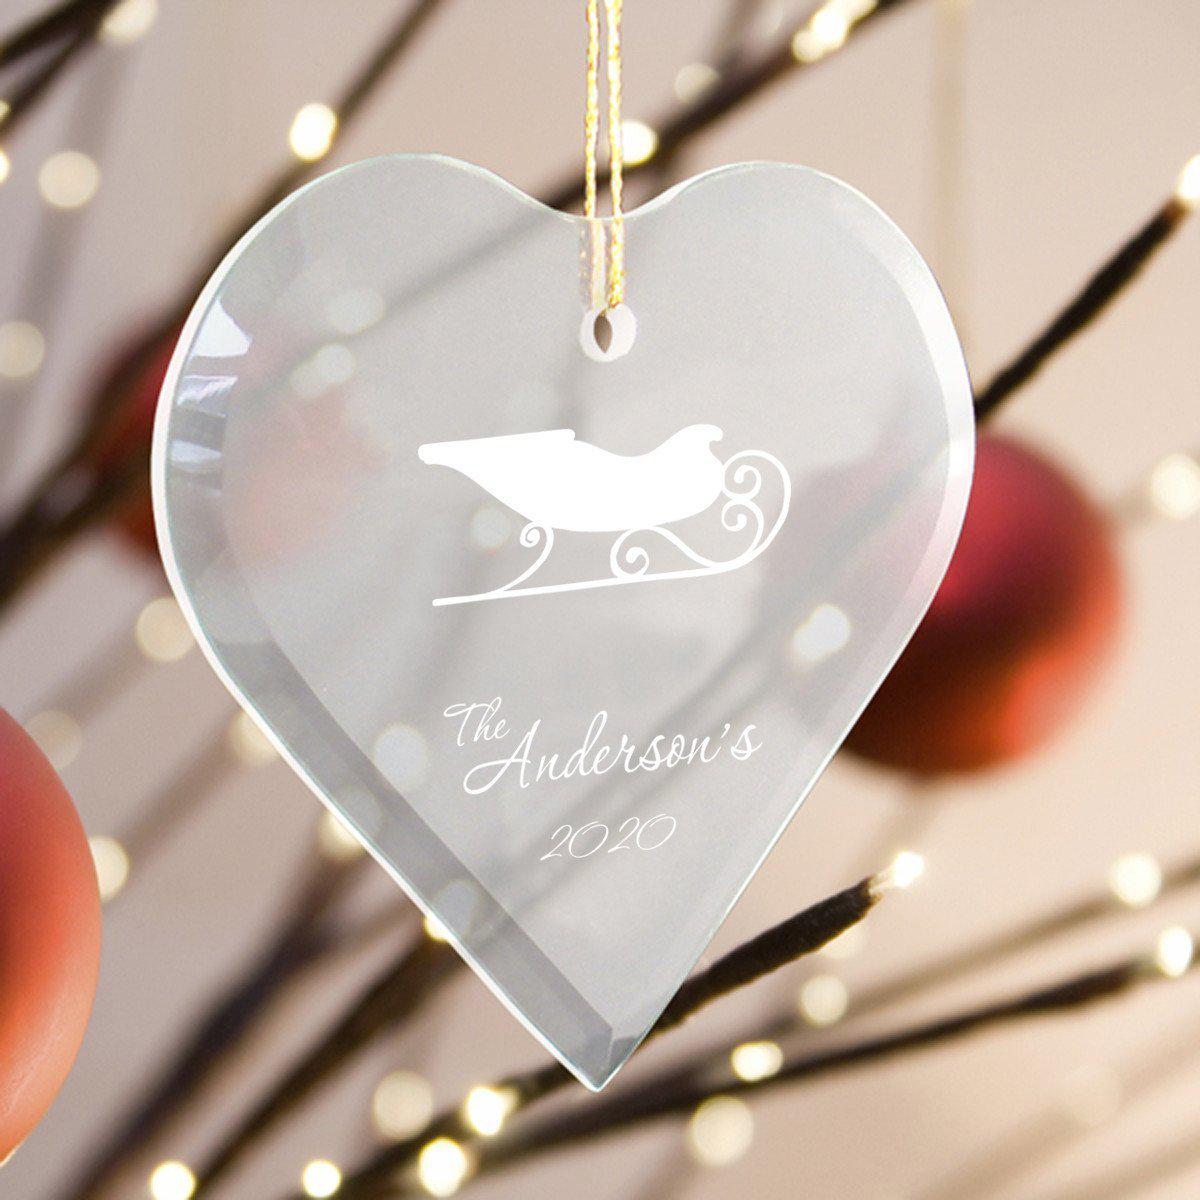 Personalized Beveled Glass Ornament - Heart Shape Personalized Ornament